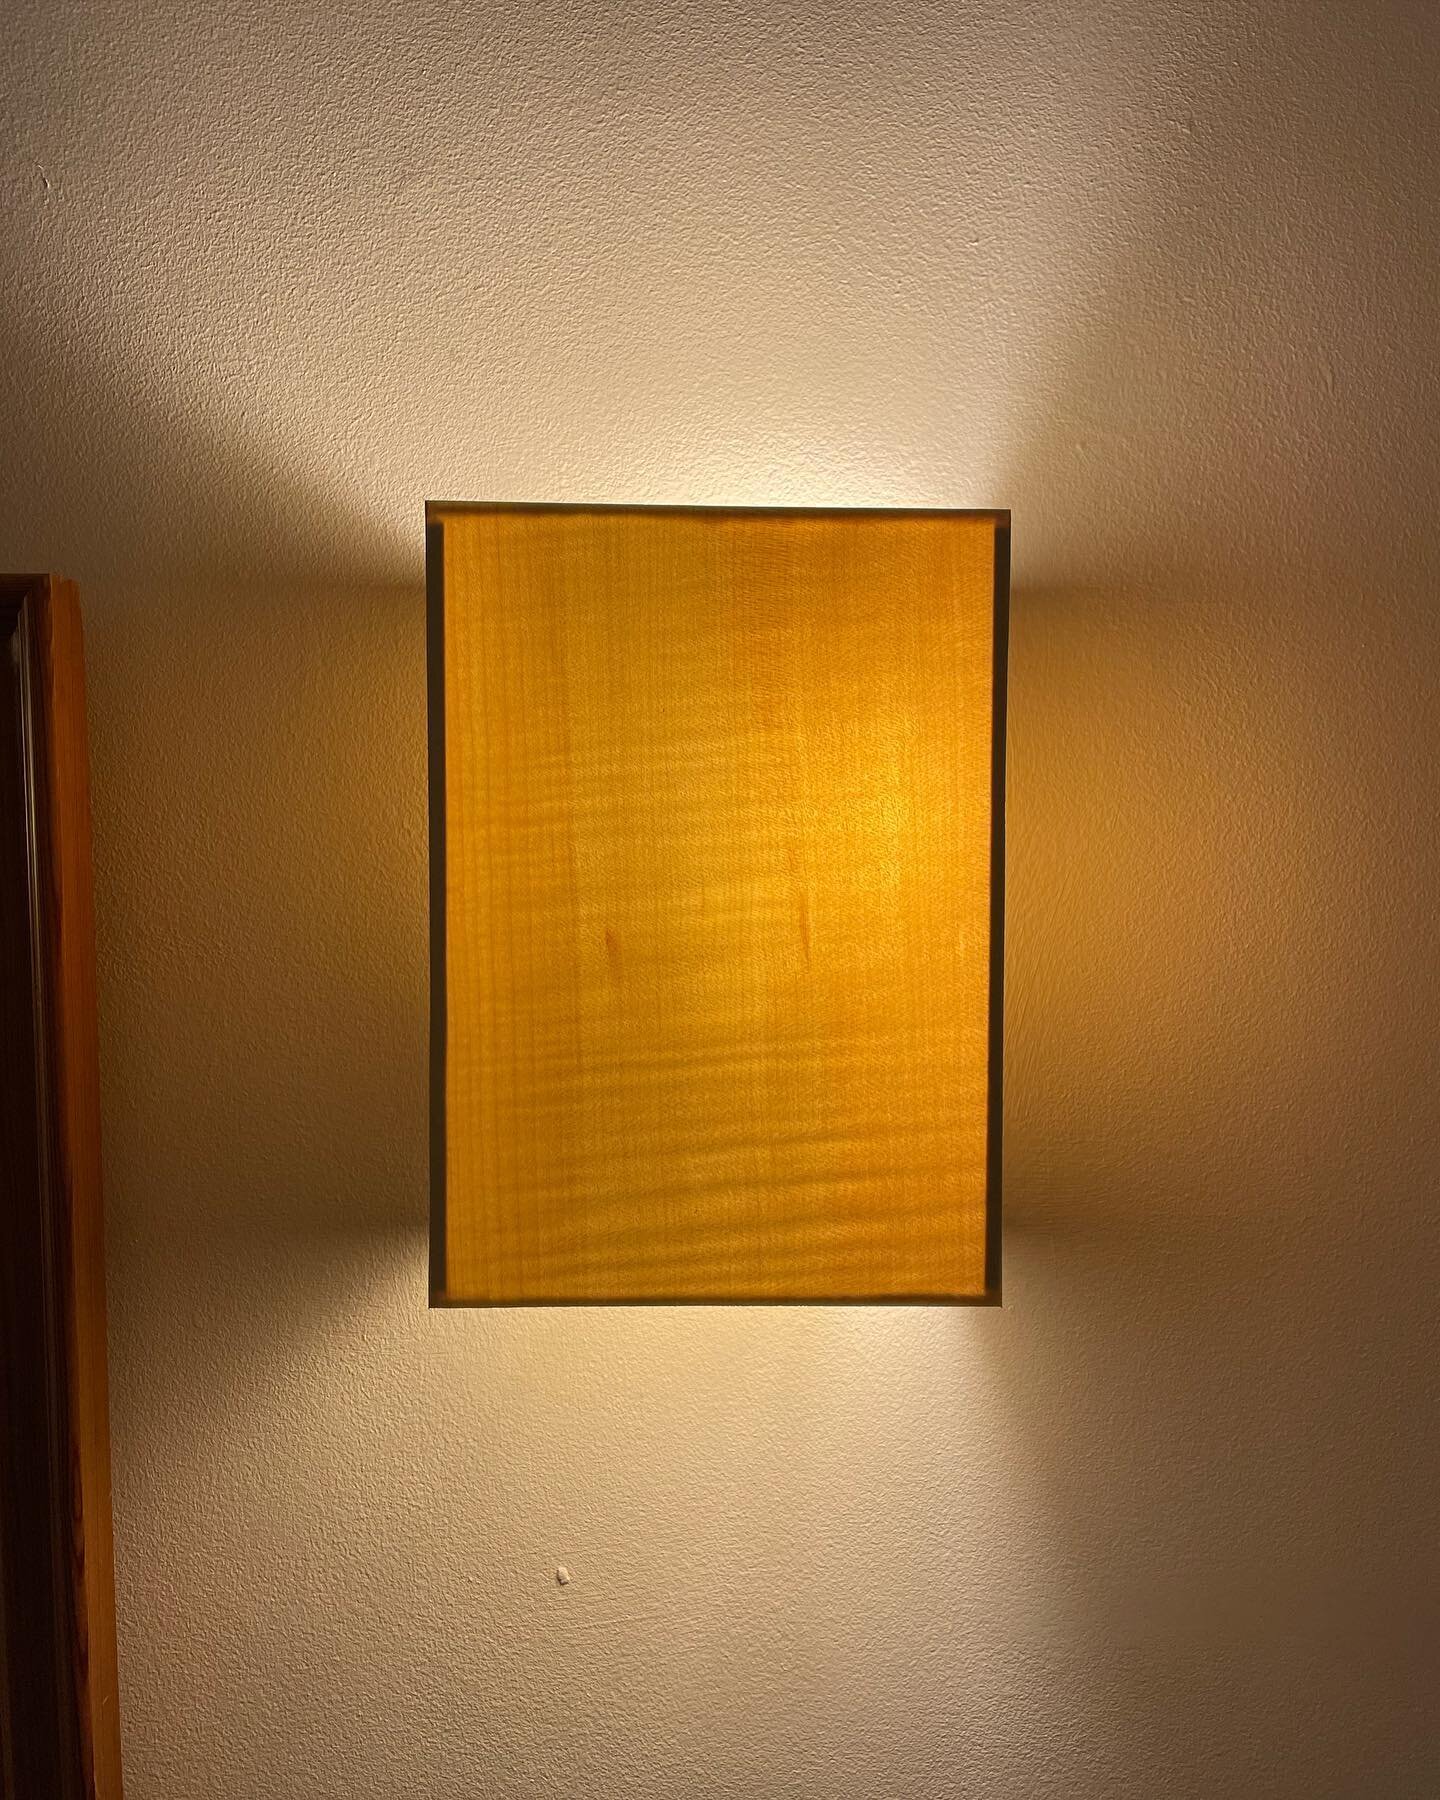 Sycamore veneer wall lampshade I recently made for my flat.